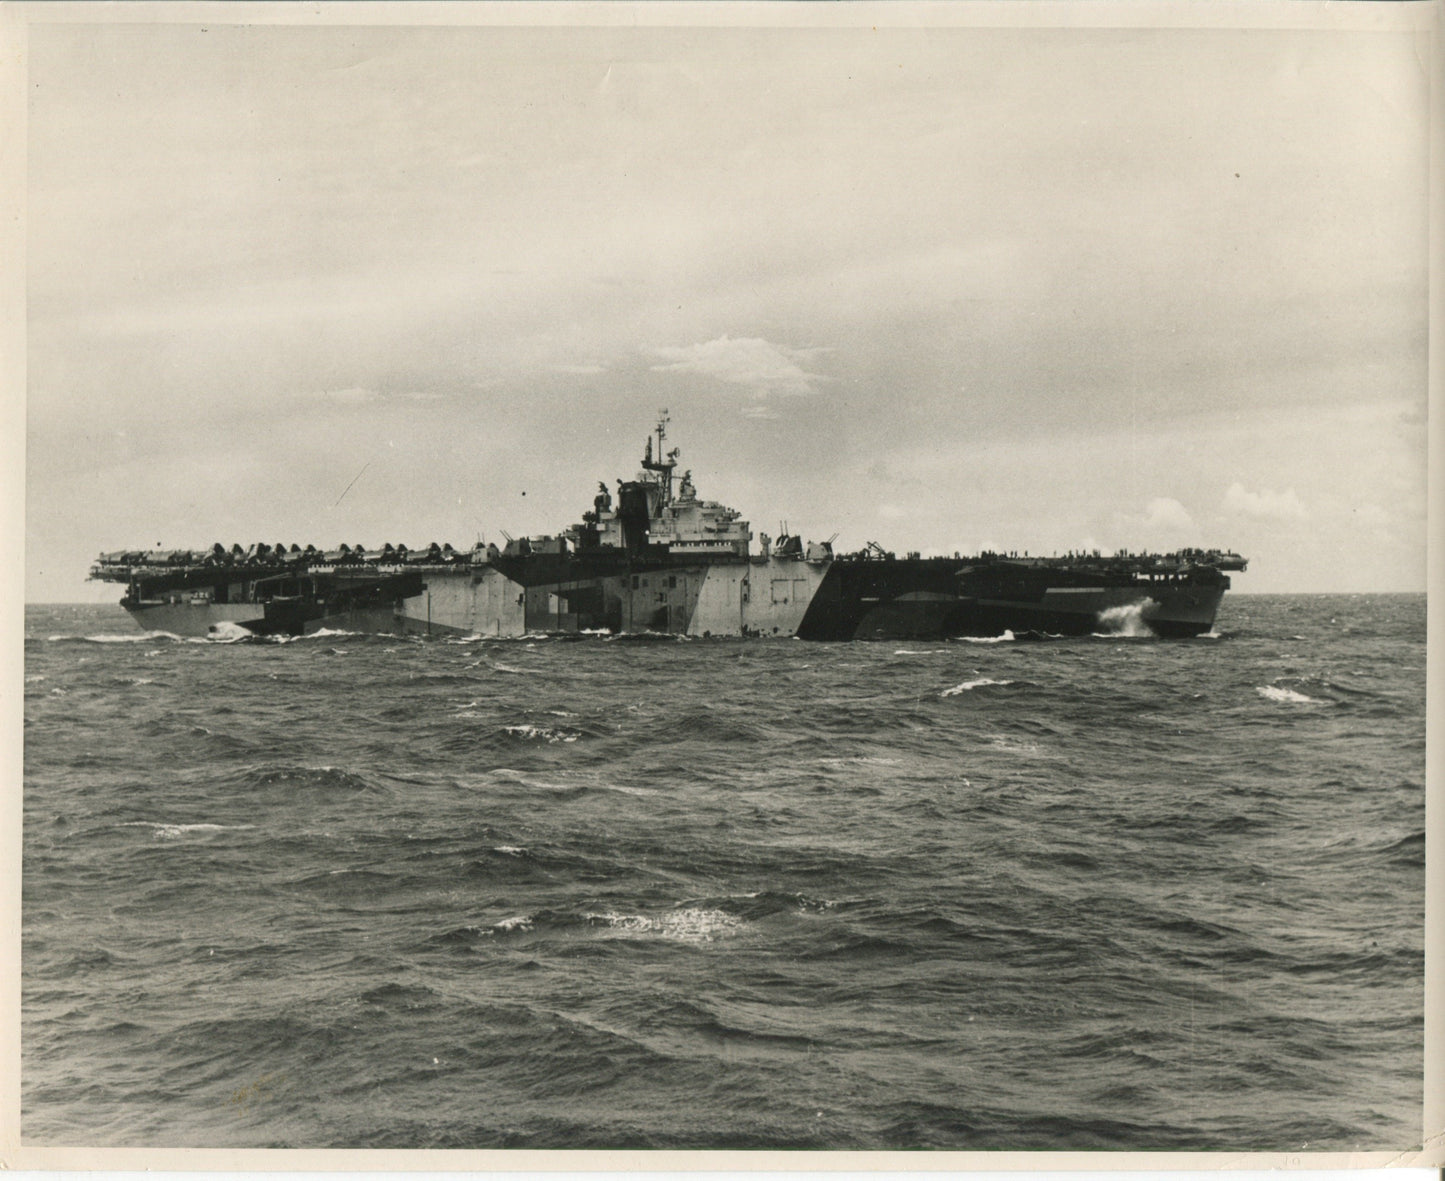 Official Navy Photo of WWII era USS Franklin (CV-13) Aircraft Carrier - Annapolis Maritime Antiques